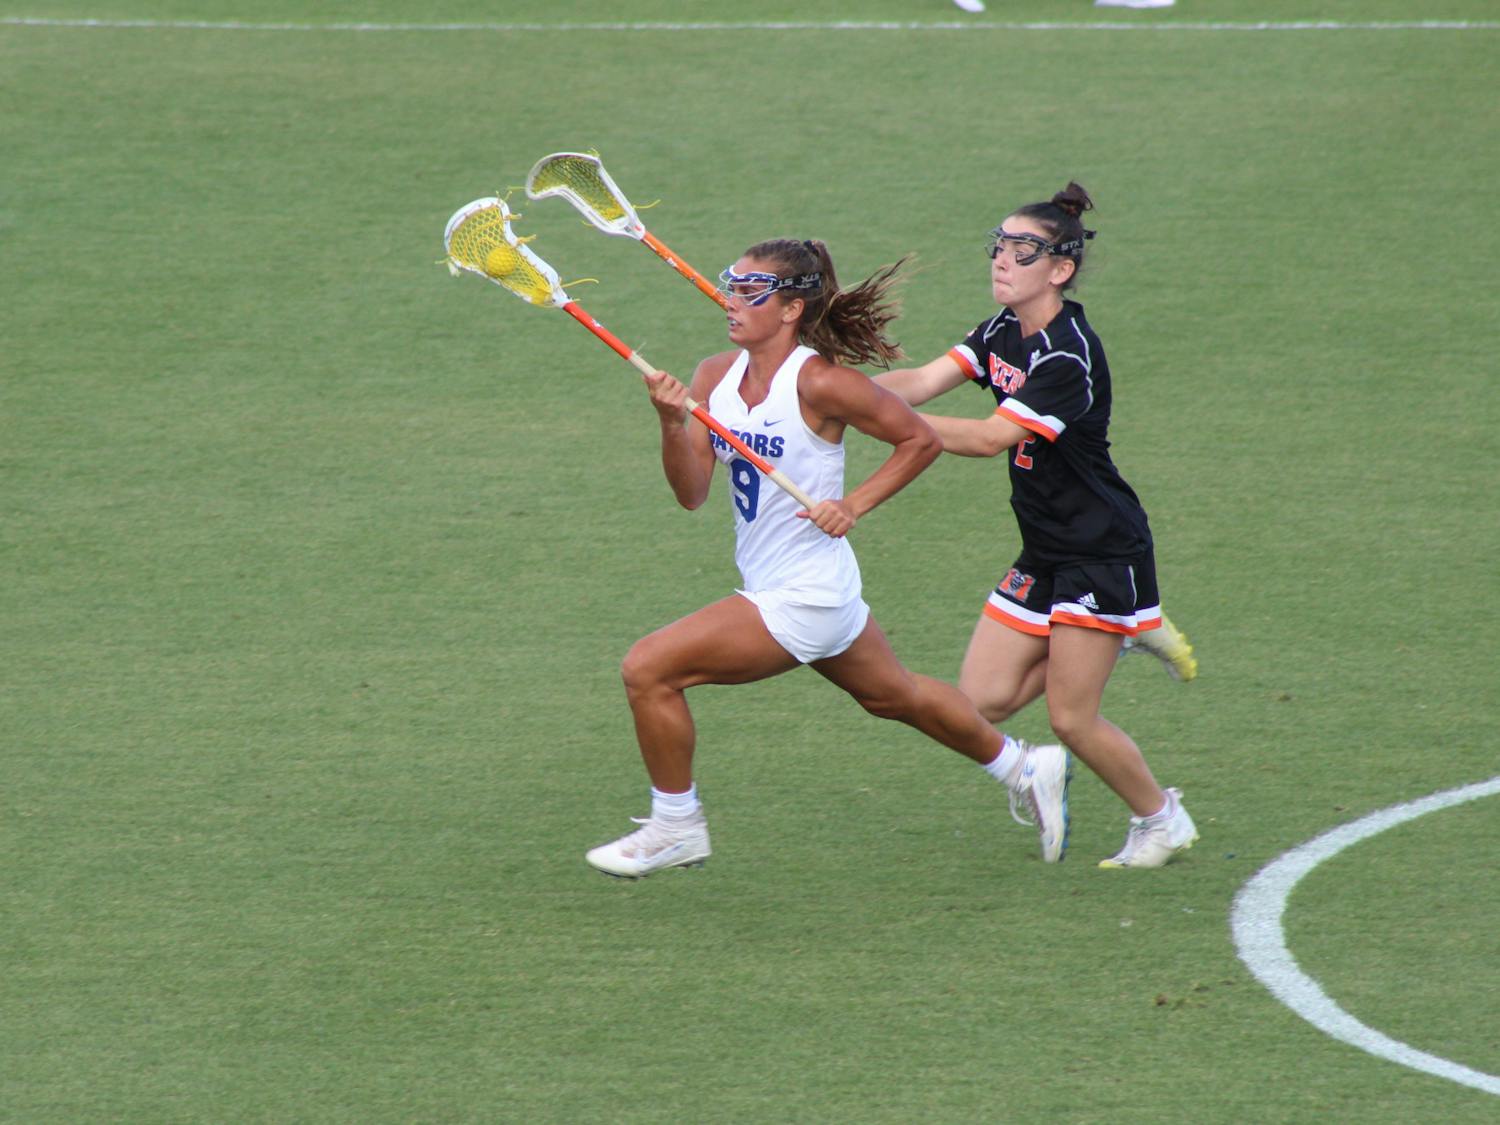 Florida's Emily Heller sprints down the field Friday against Mercer. Florida defeated the Bears 23-5 to move to the second round of the 2021 NCAA Women’s Lacrosse Tournament.